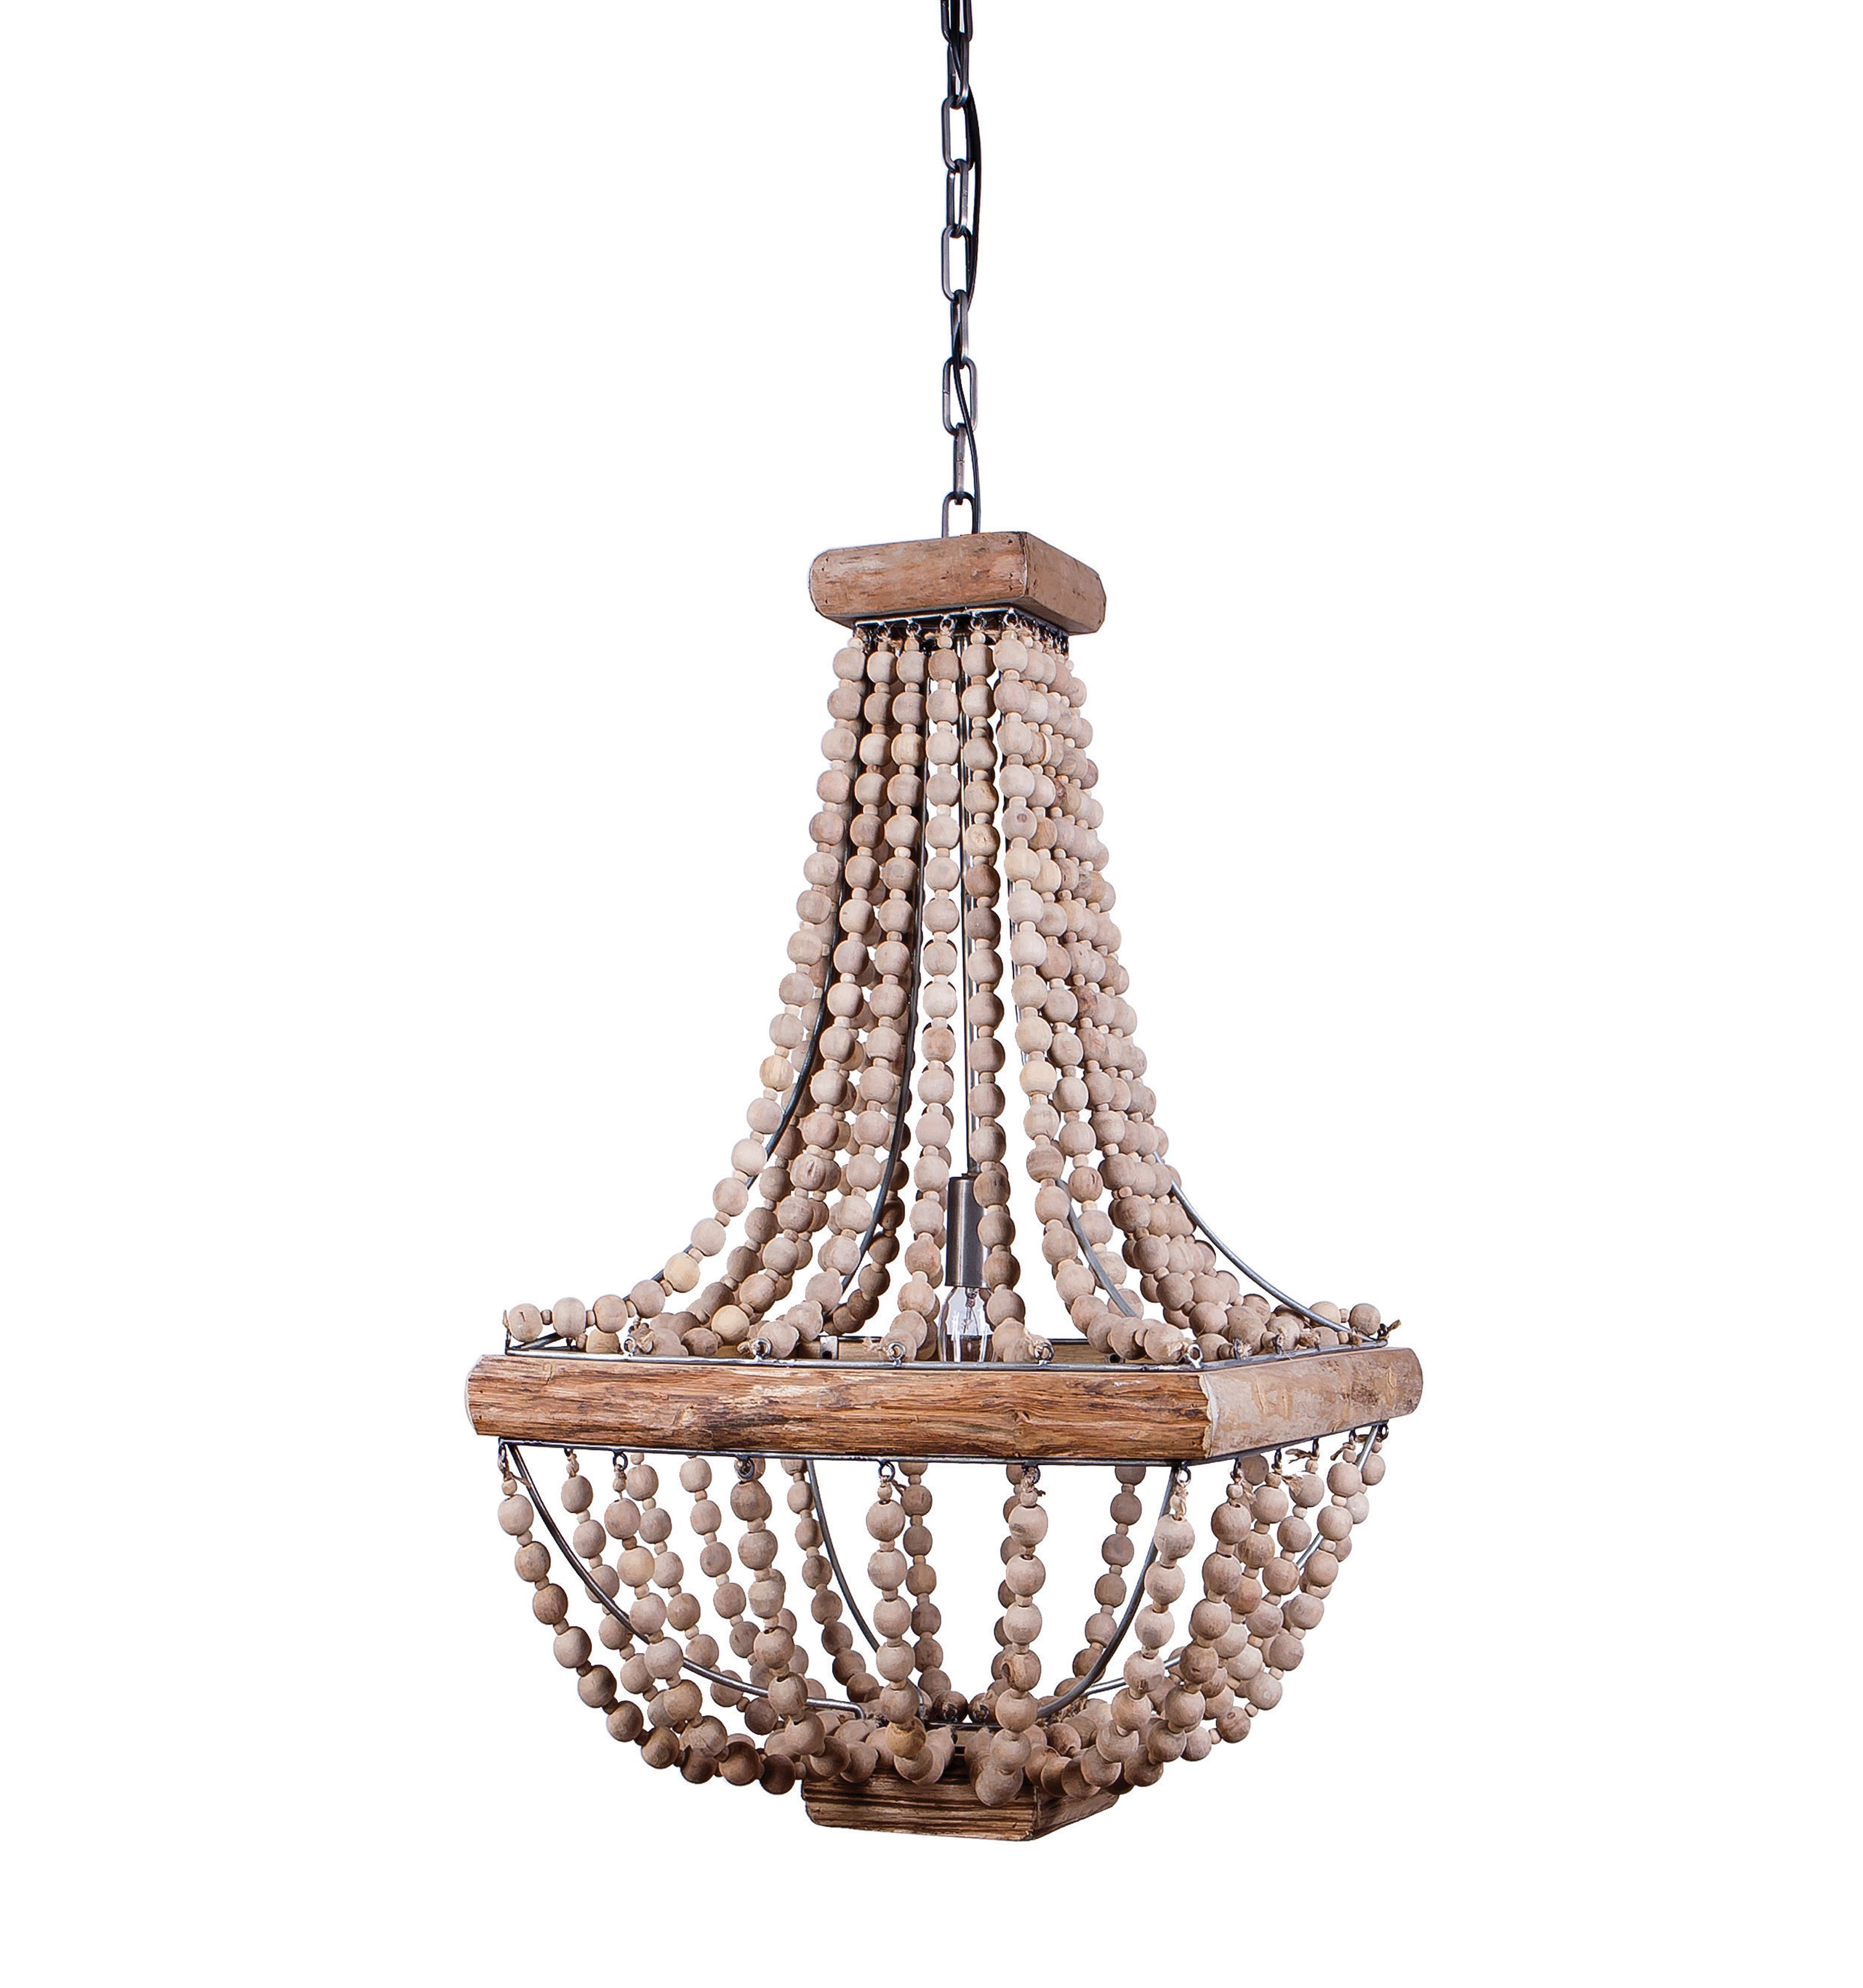 Wood & Metal Framed Chandelier with Wood Bead Draping - Image 0